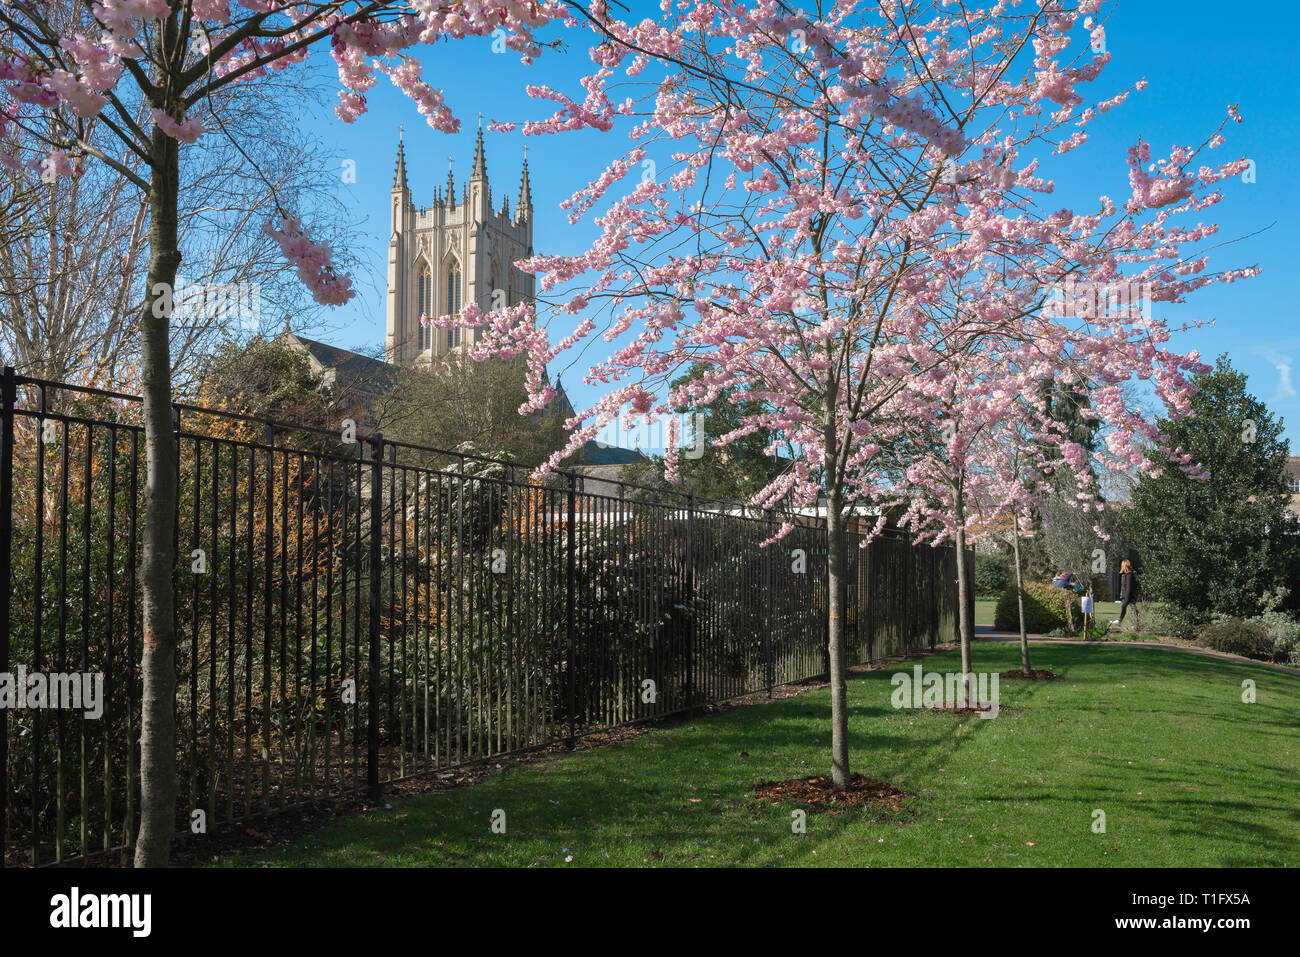 Spring UK England, view of young cherry trees in blossom with a cathedral tower visible in the background, Abbey Gardens, Bury St Edmunds, Suffolk, UK Stock Photo